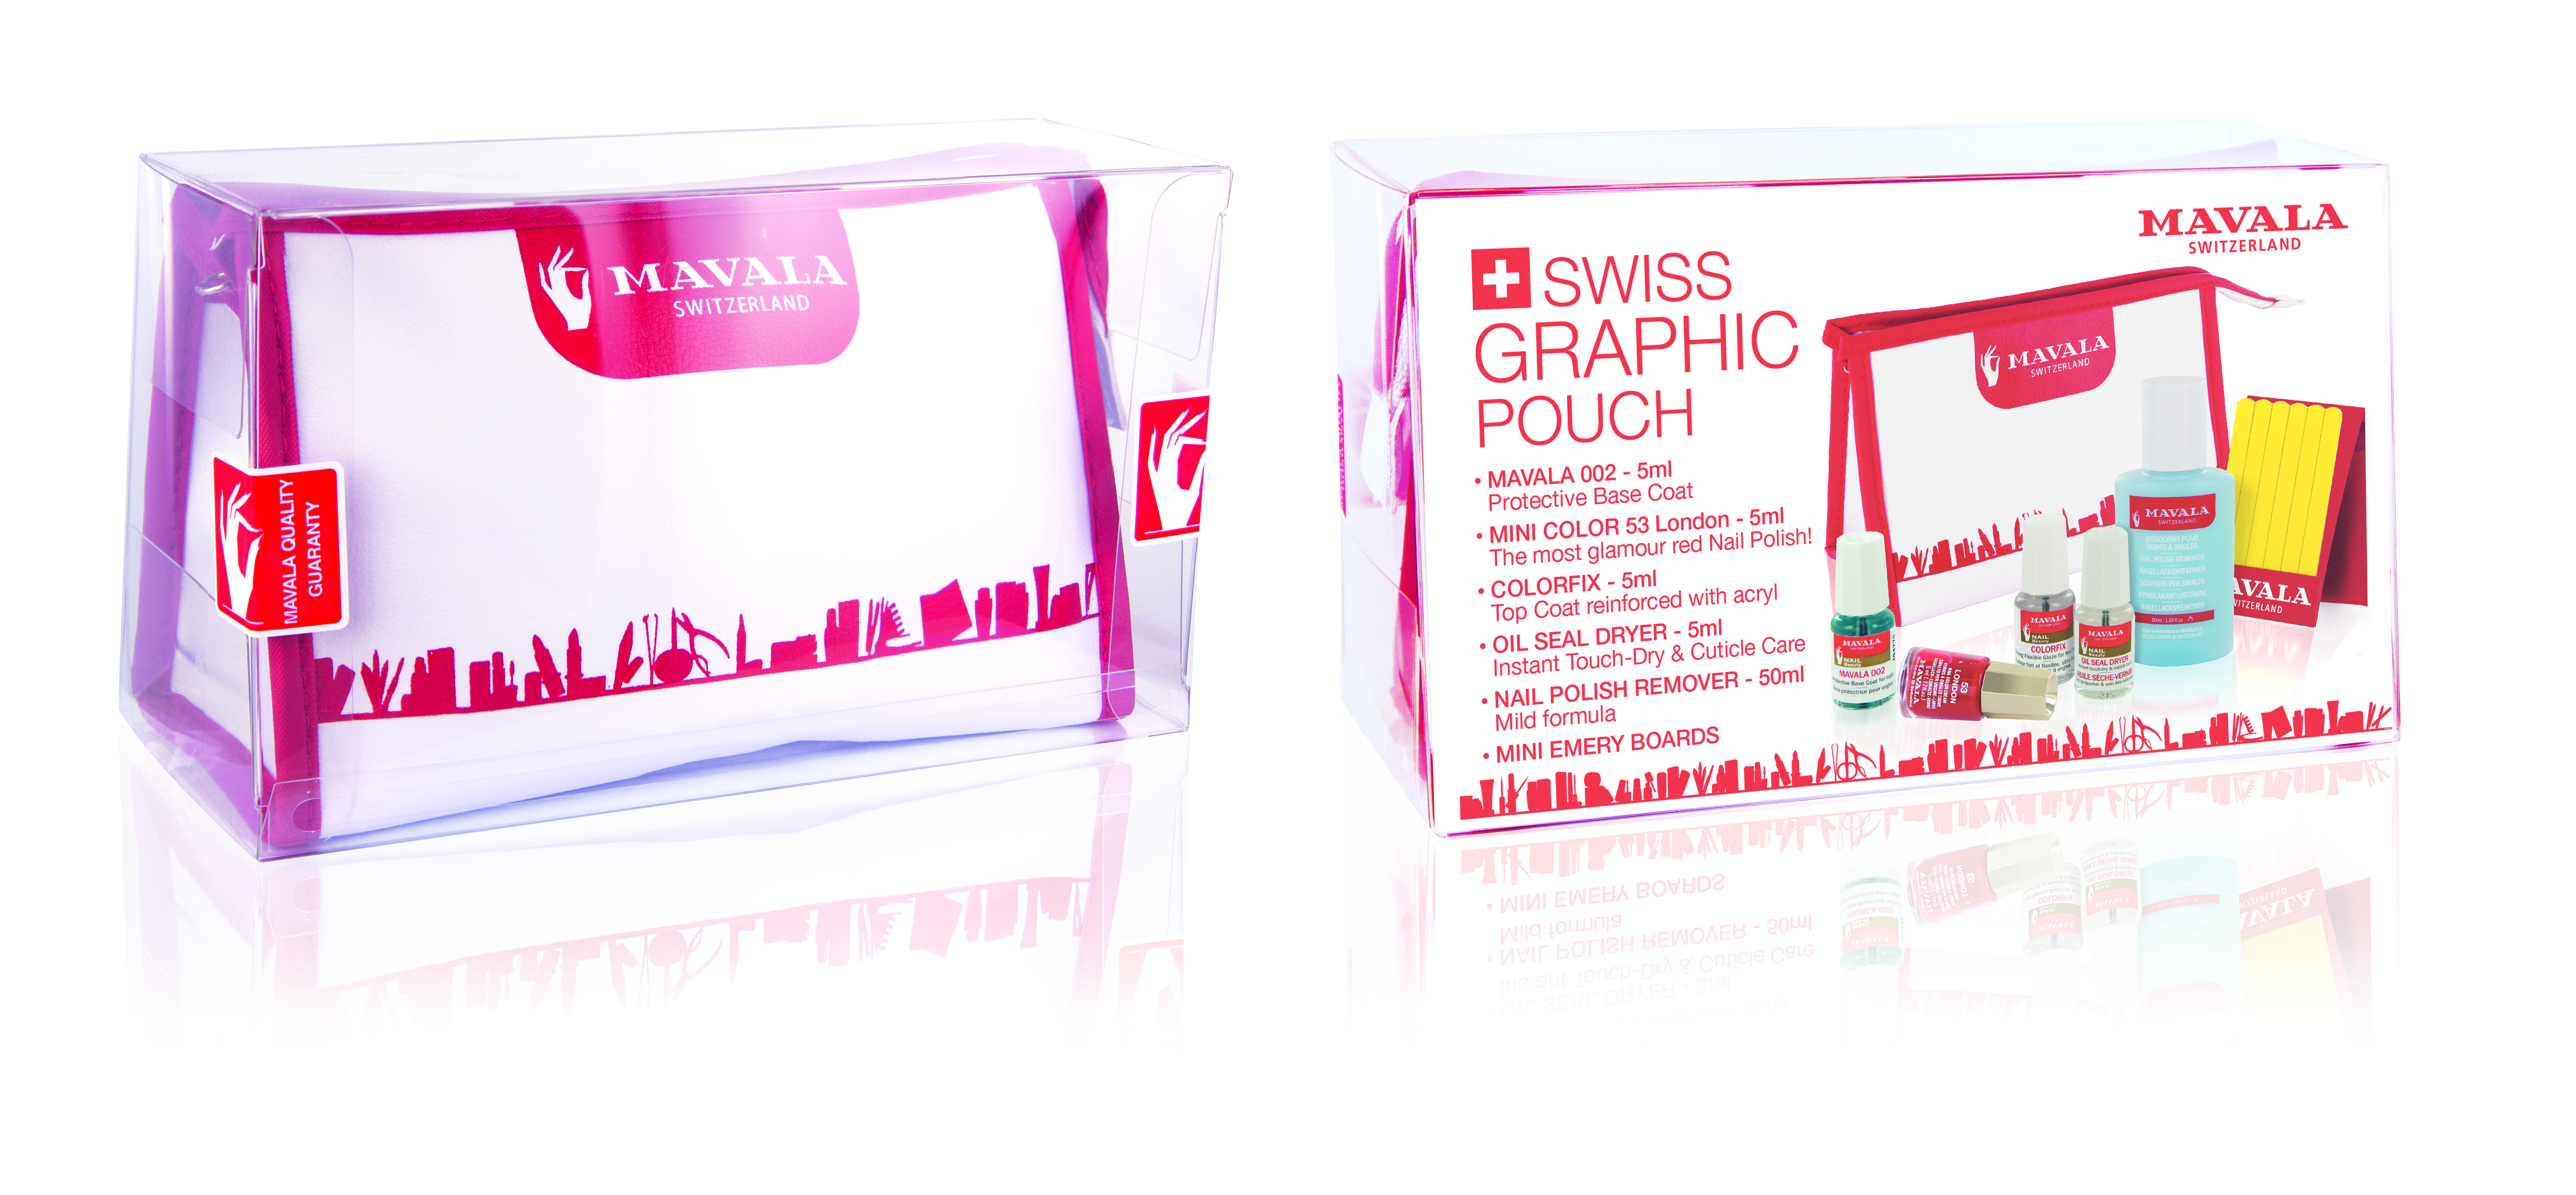 9816201ALL -  MAVALA  SWISS GRAPHIC POUCH